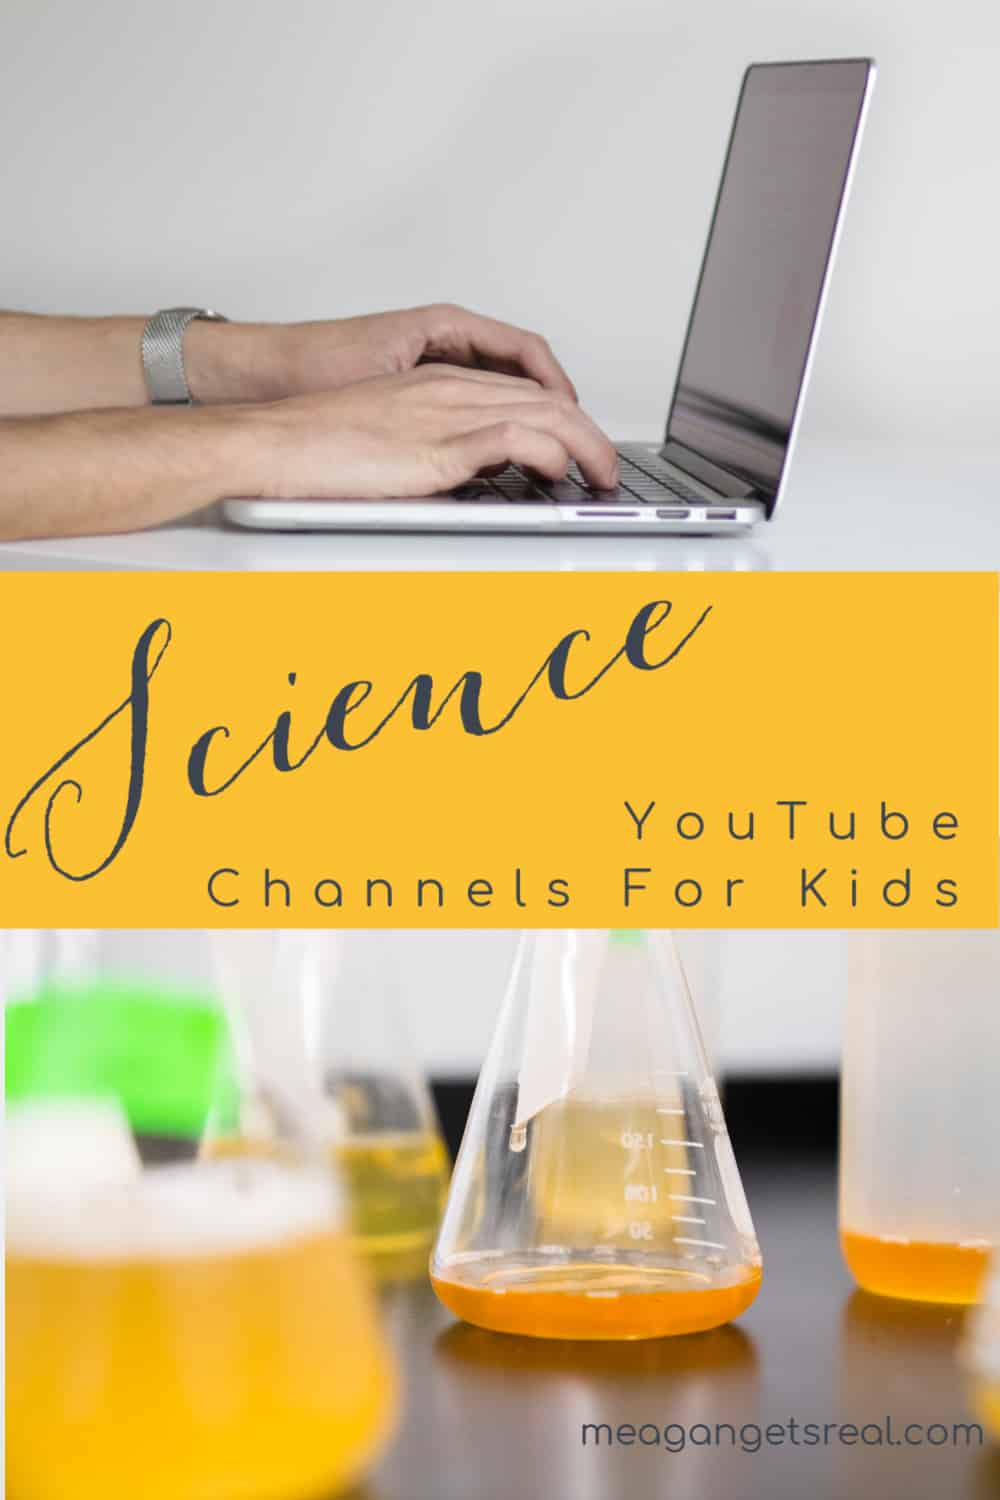 Science YouTube Channels for kids to use for homeschooling or to have fun learning about science.